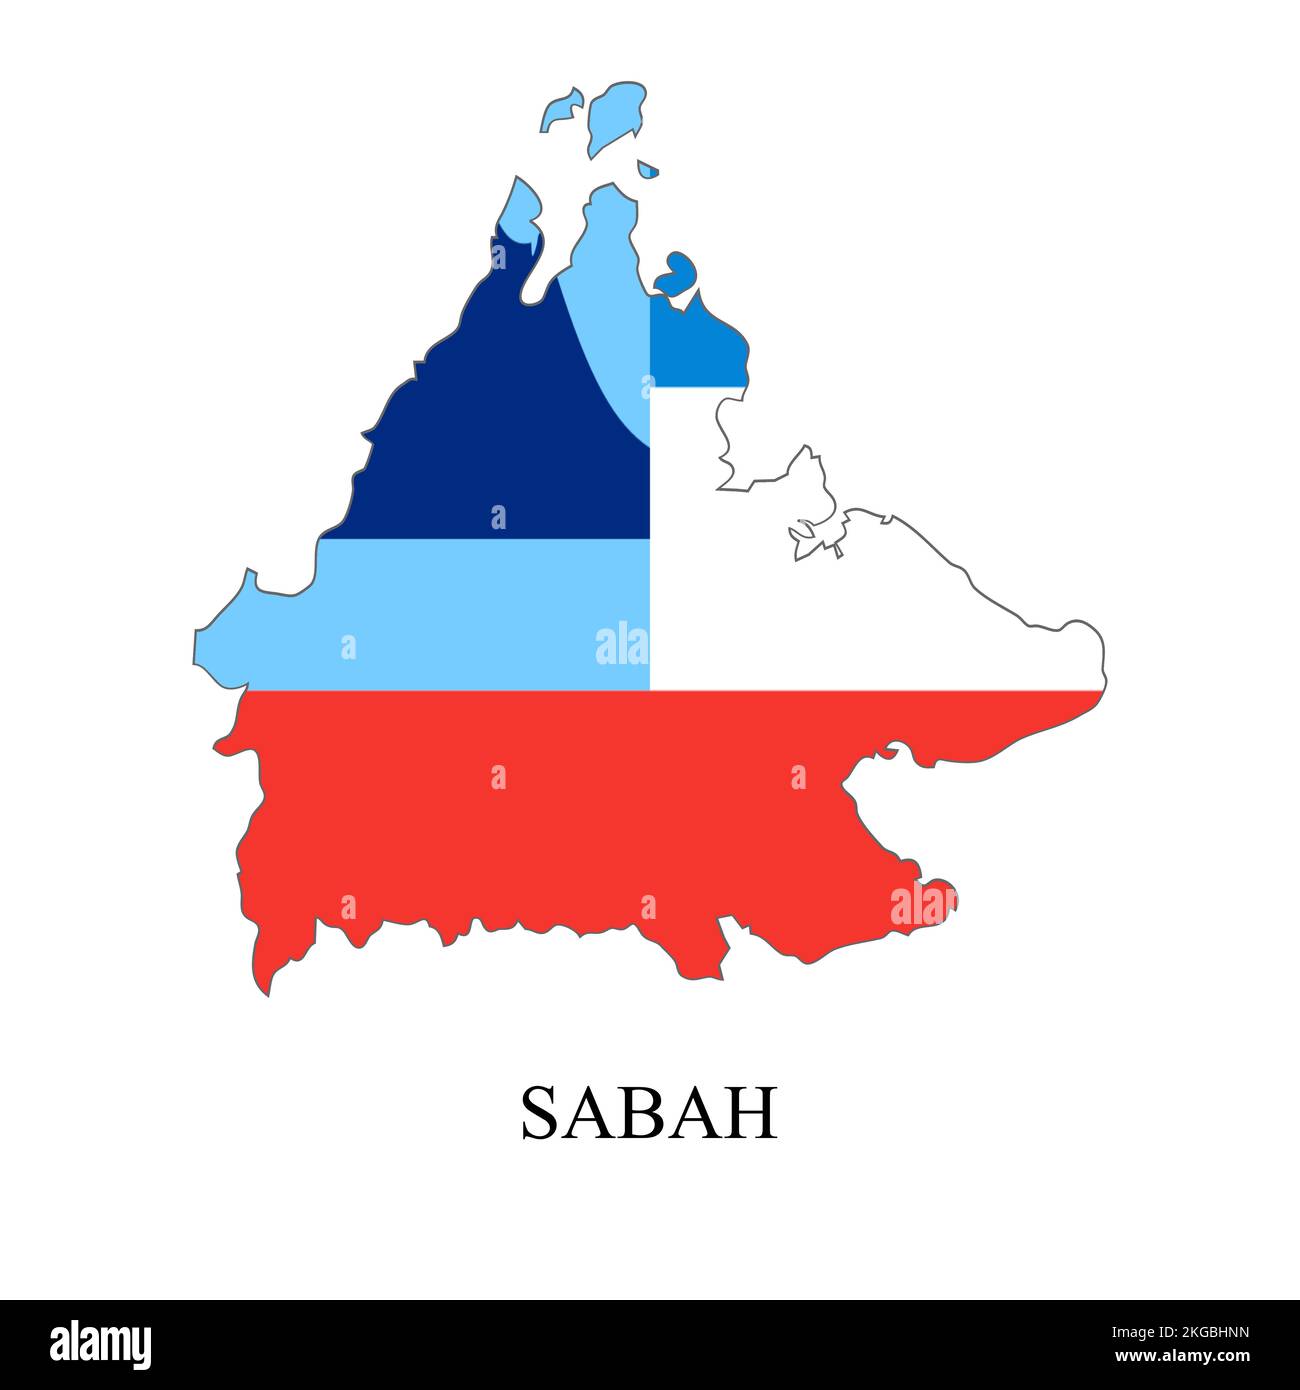 Sabah map vector illustration. Malaysian city. State in Malaysia Stock Vector